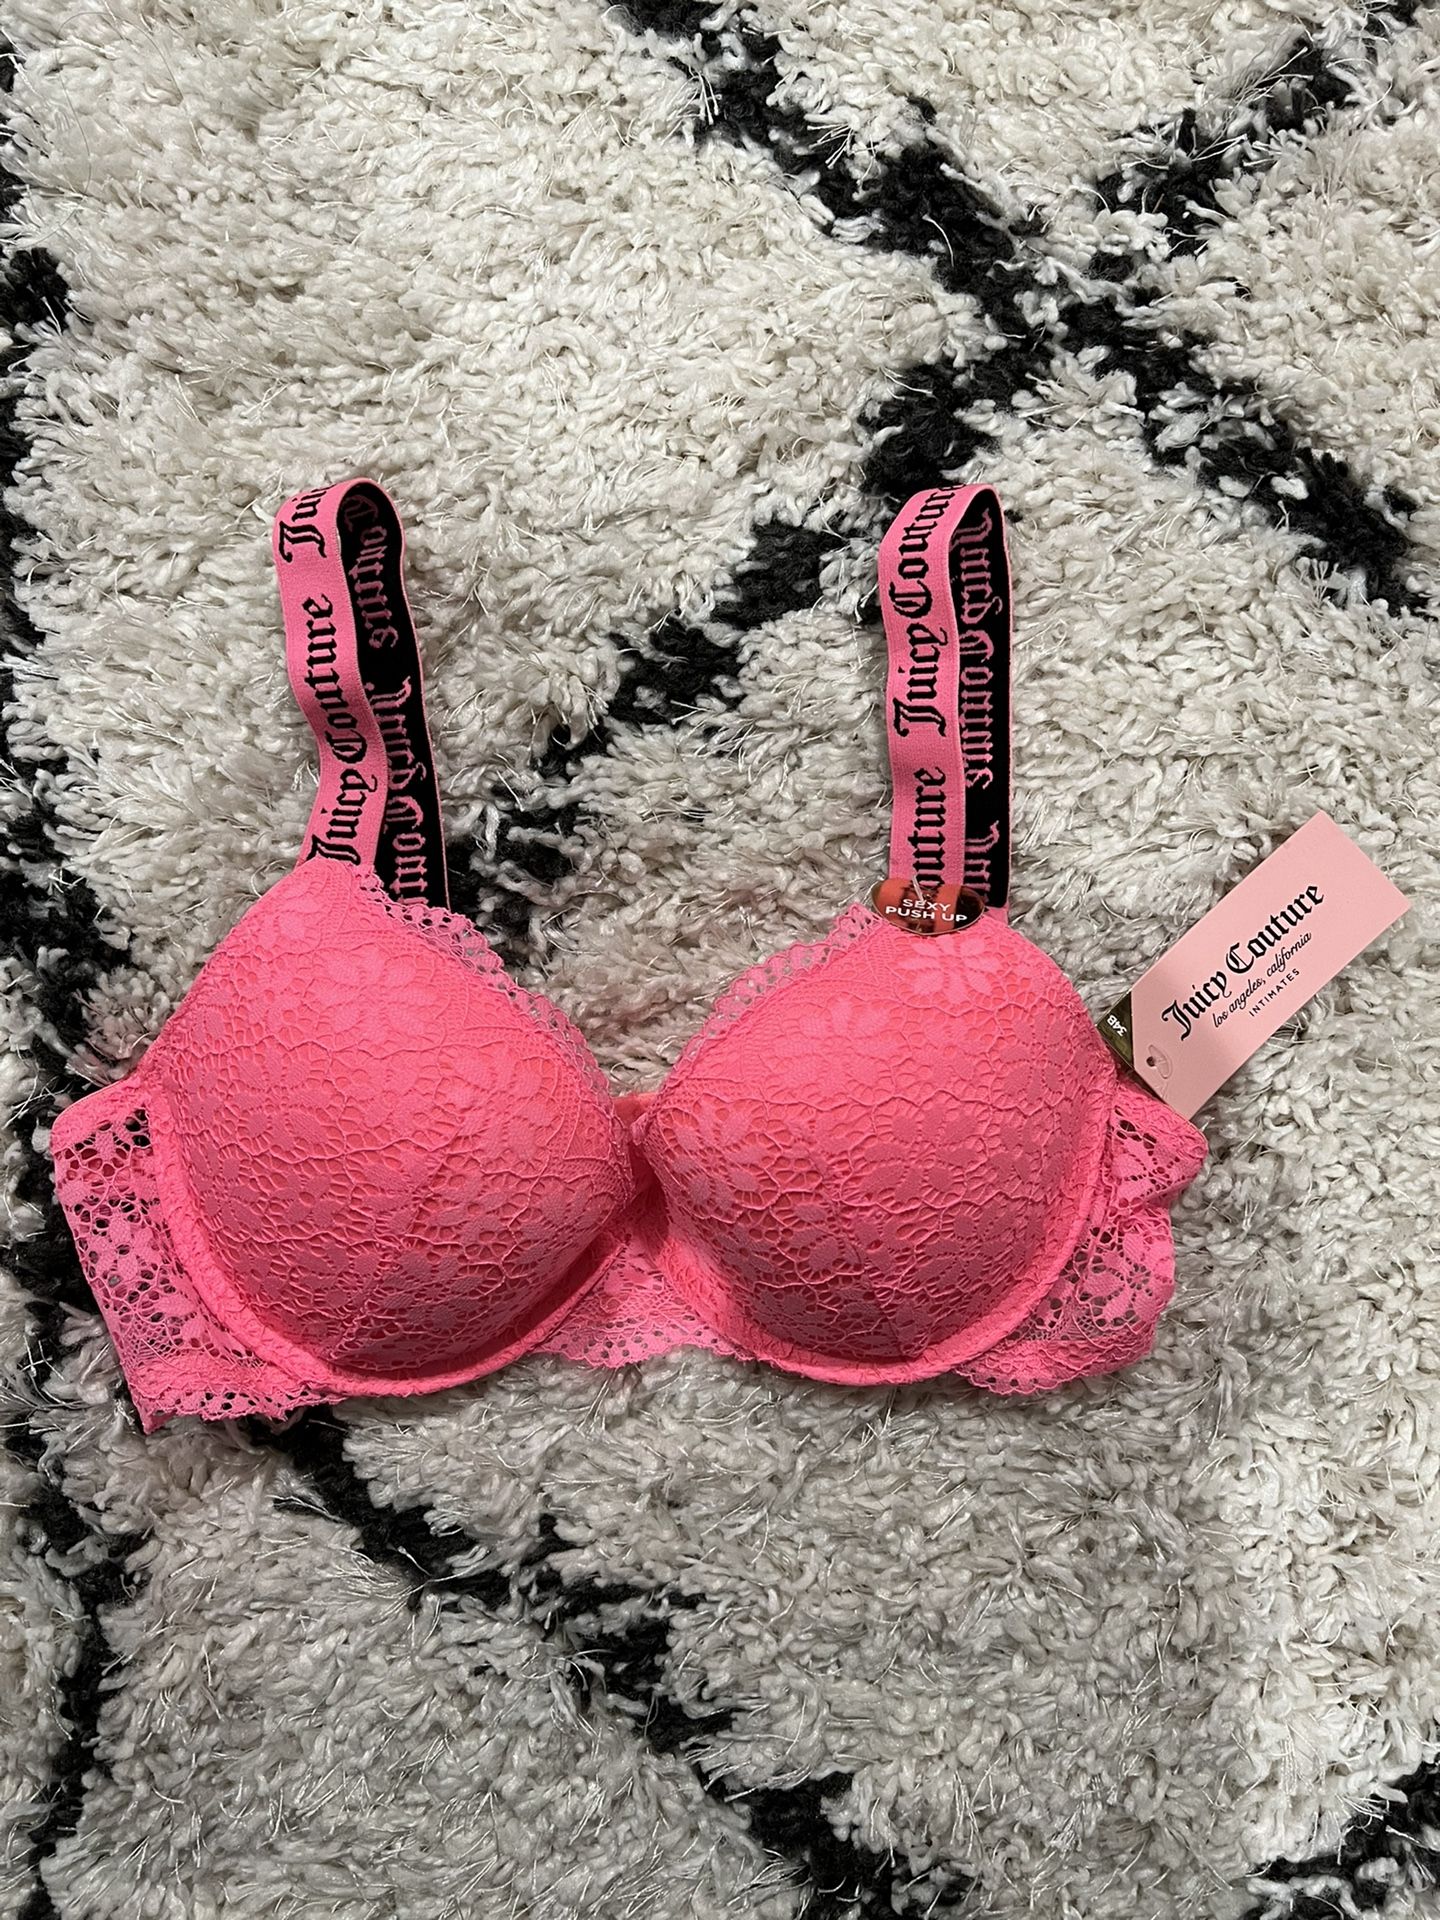 JUICY COUTURE INTIMATES SEXY PUSH UP BRA PINK 36C $48.00 NWT 1 PC